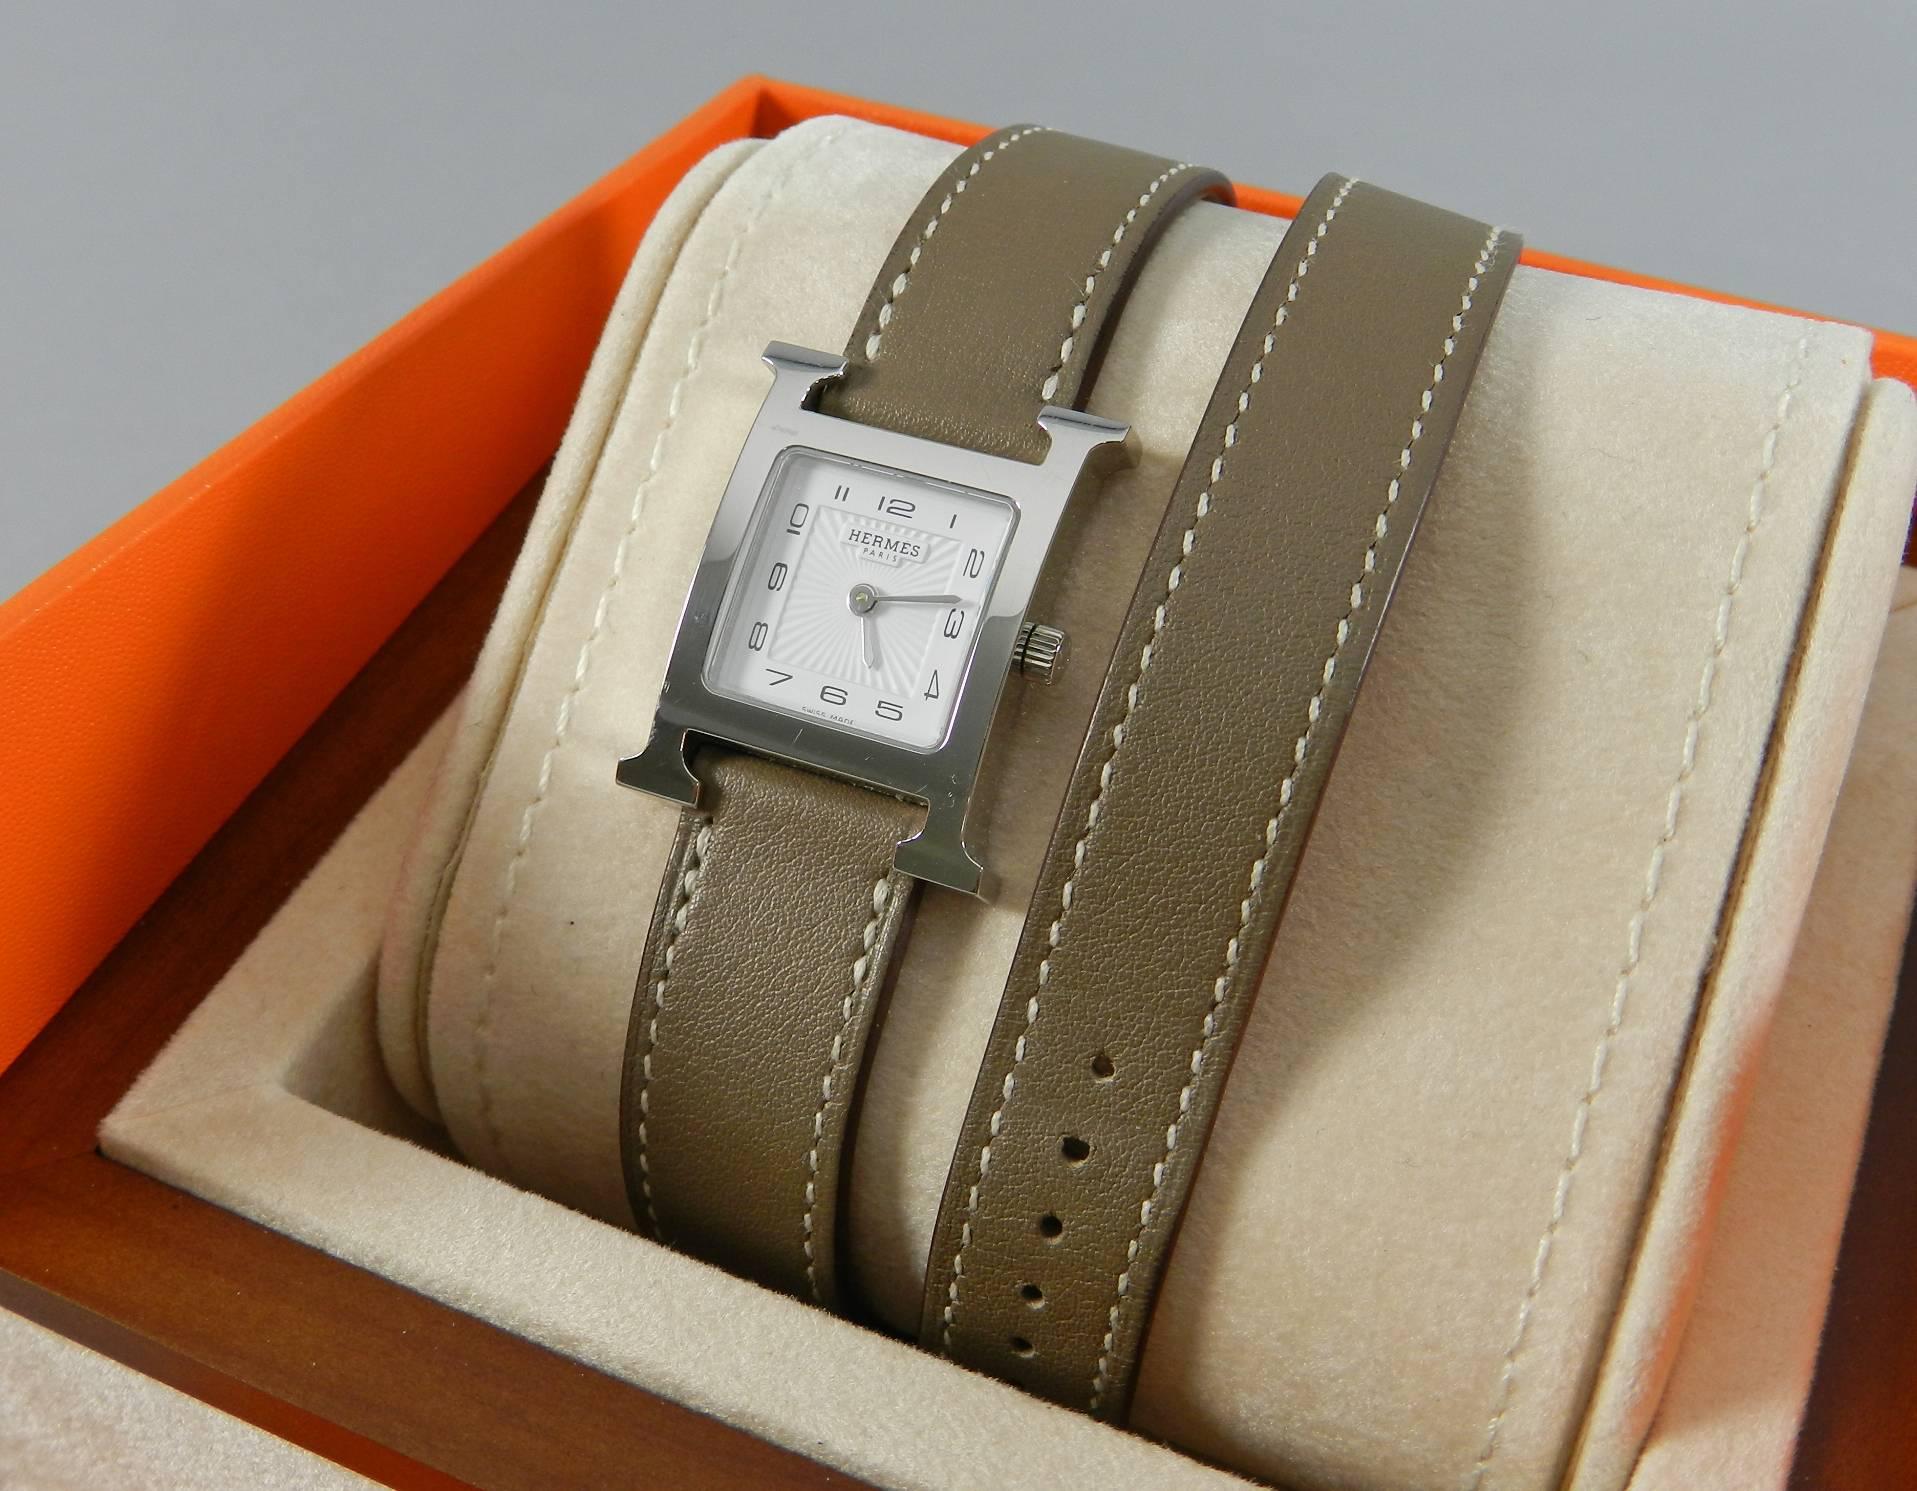 Hermes H Hour double tour PM watch.  Small PM size with front face measuring 21 x 21 mm not including points of the H.  Original box and papers and proof of purchase in 08/14.  Date stamp Q in box for year 2013.  Excellent pre-owned condition.